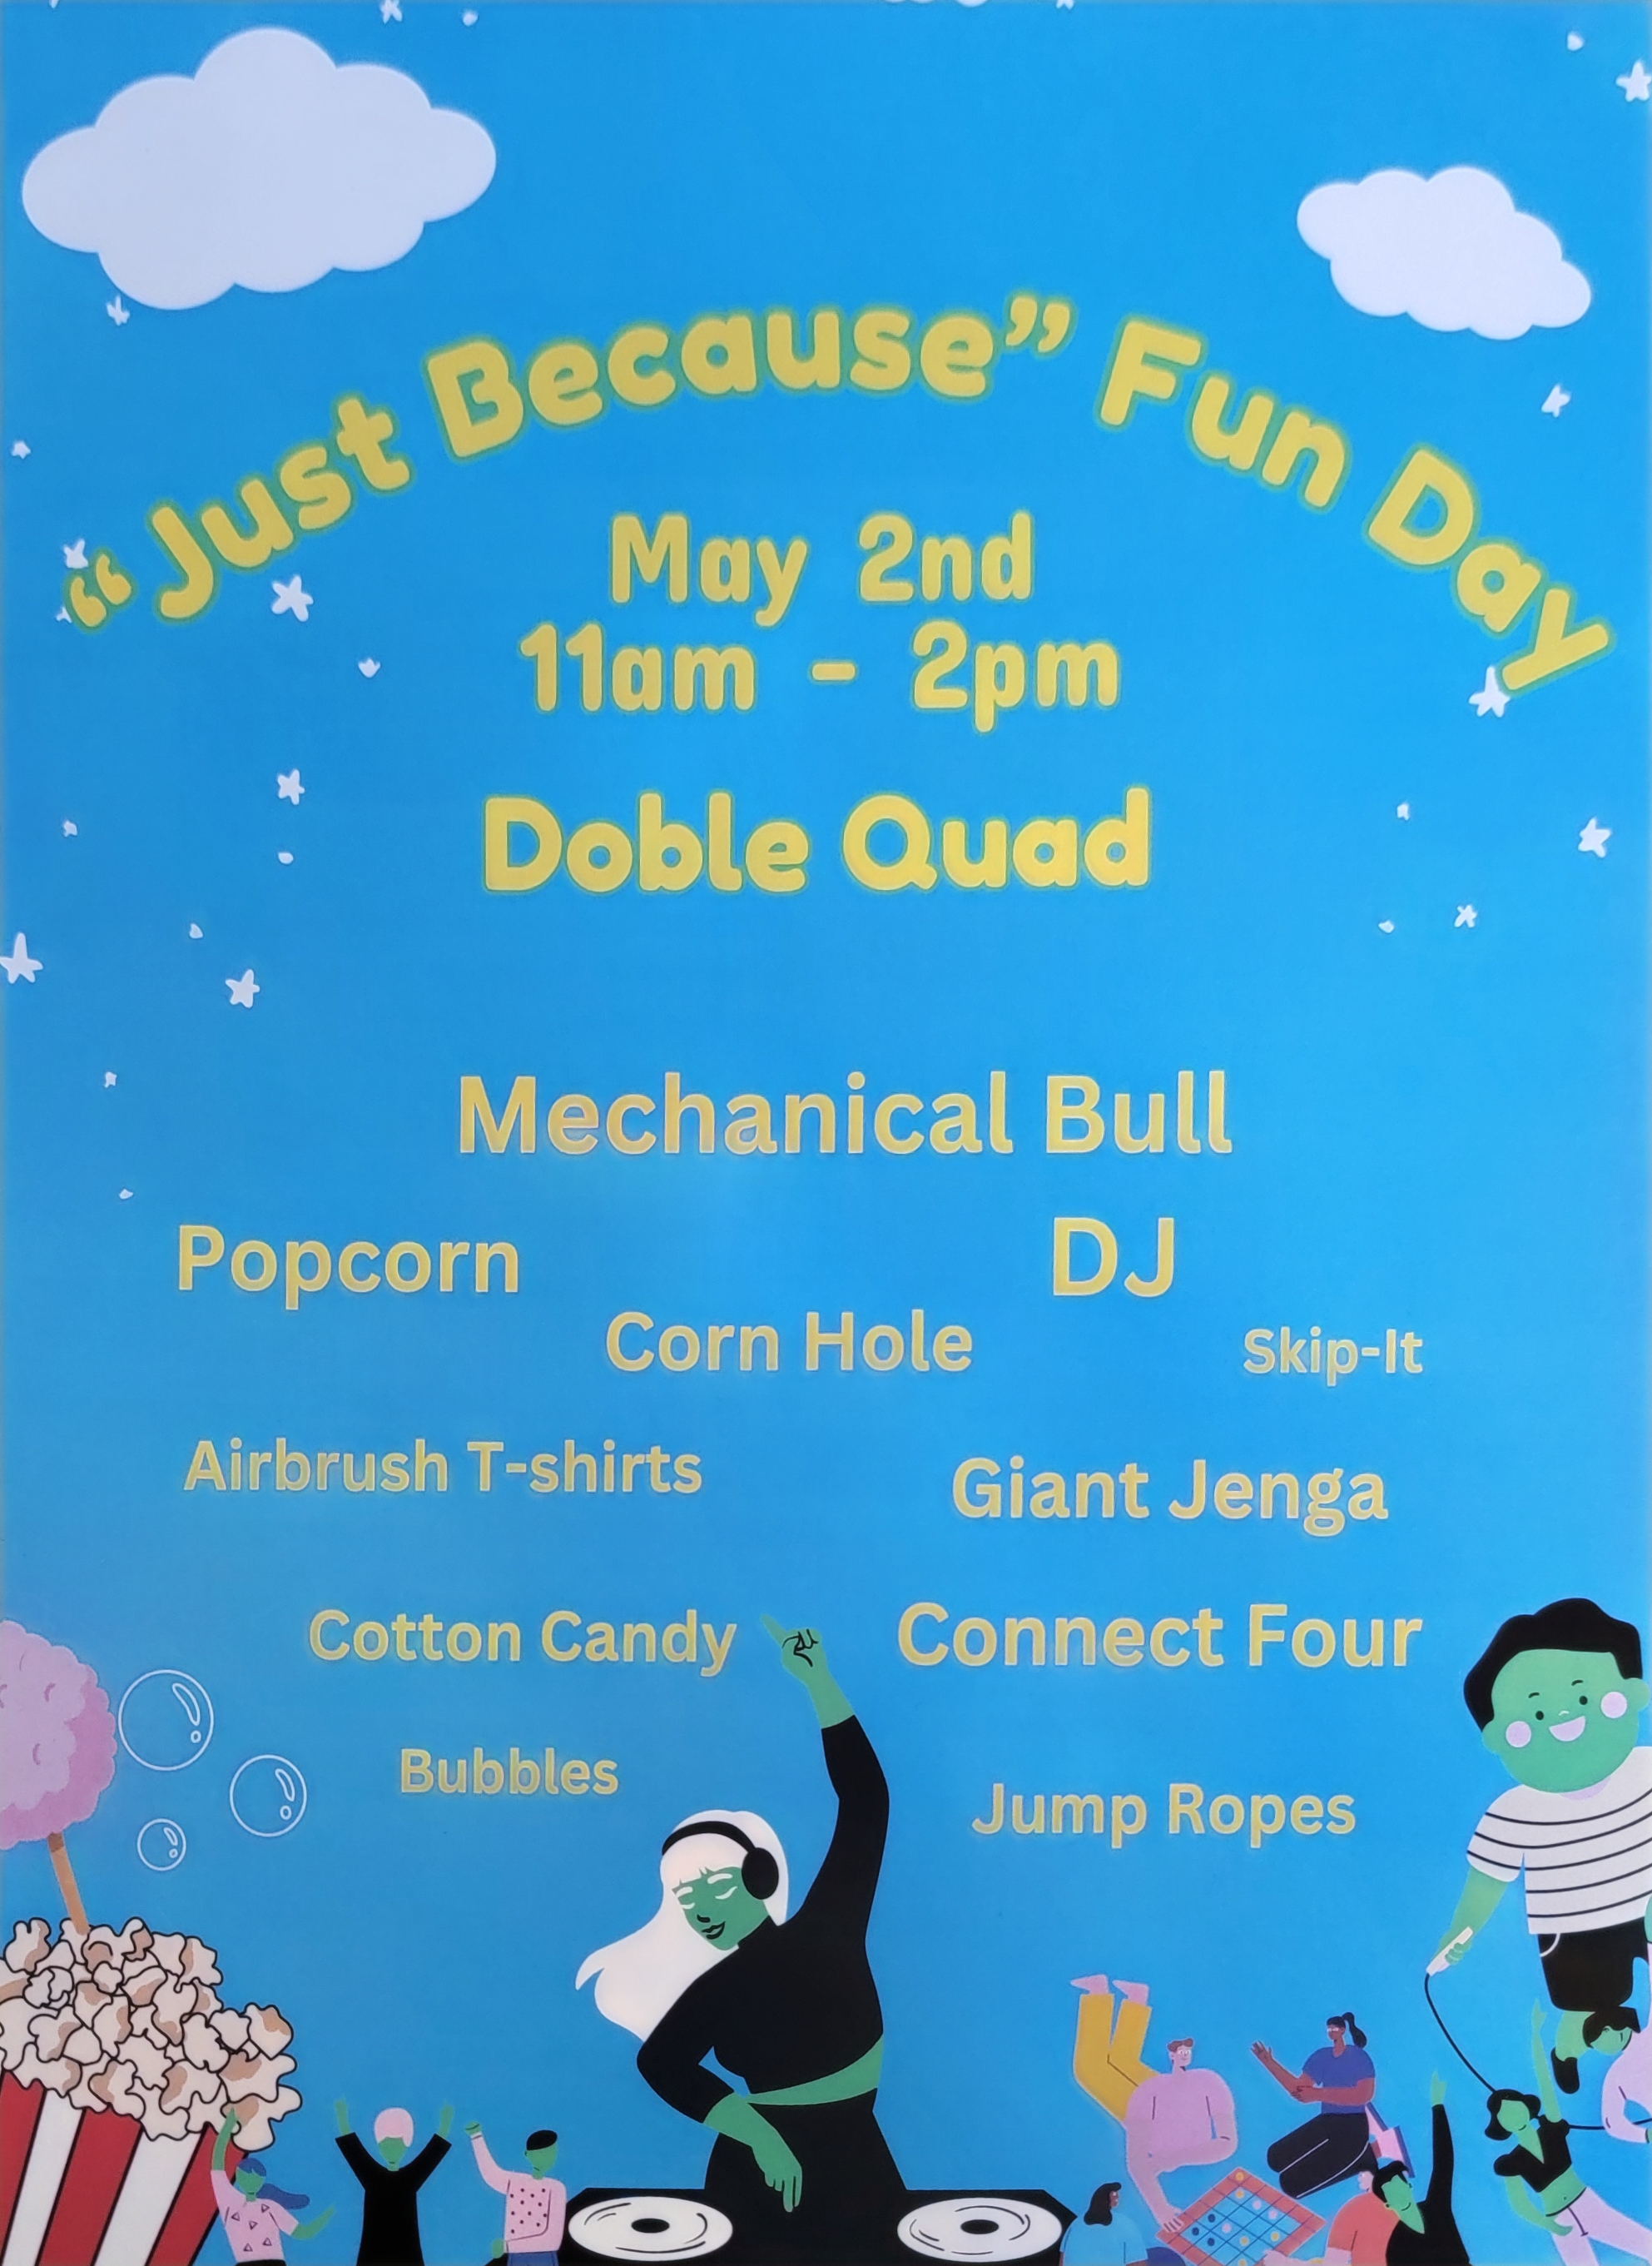 A blue poster with white clouds at the top. A clipart image of a DJ with long white hair in a black outfit is at the button, next to a bucket of popcorn. "Just Because Fun Day" is written in yellow across the poster.